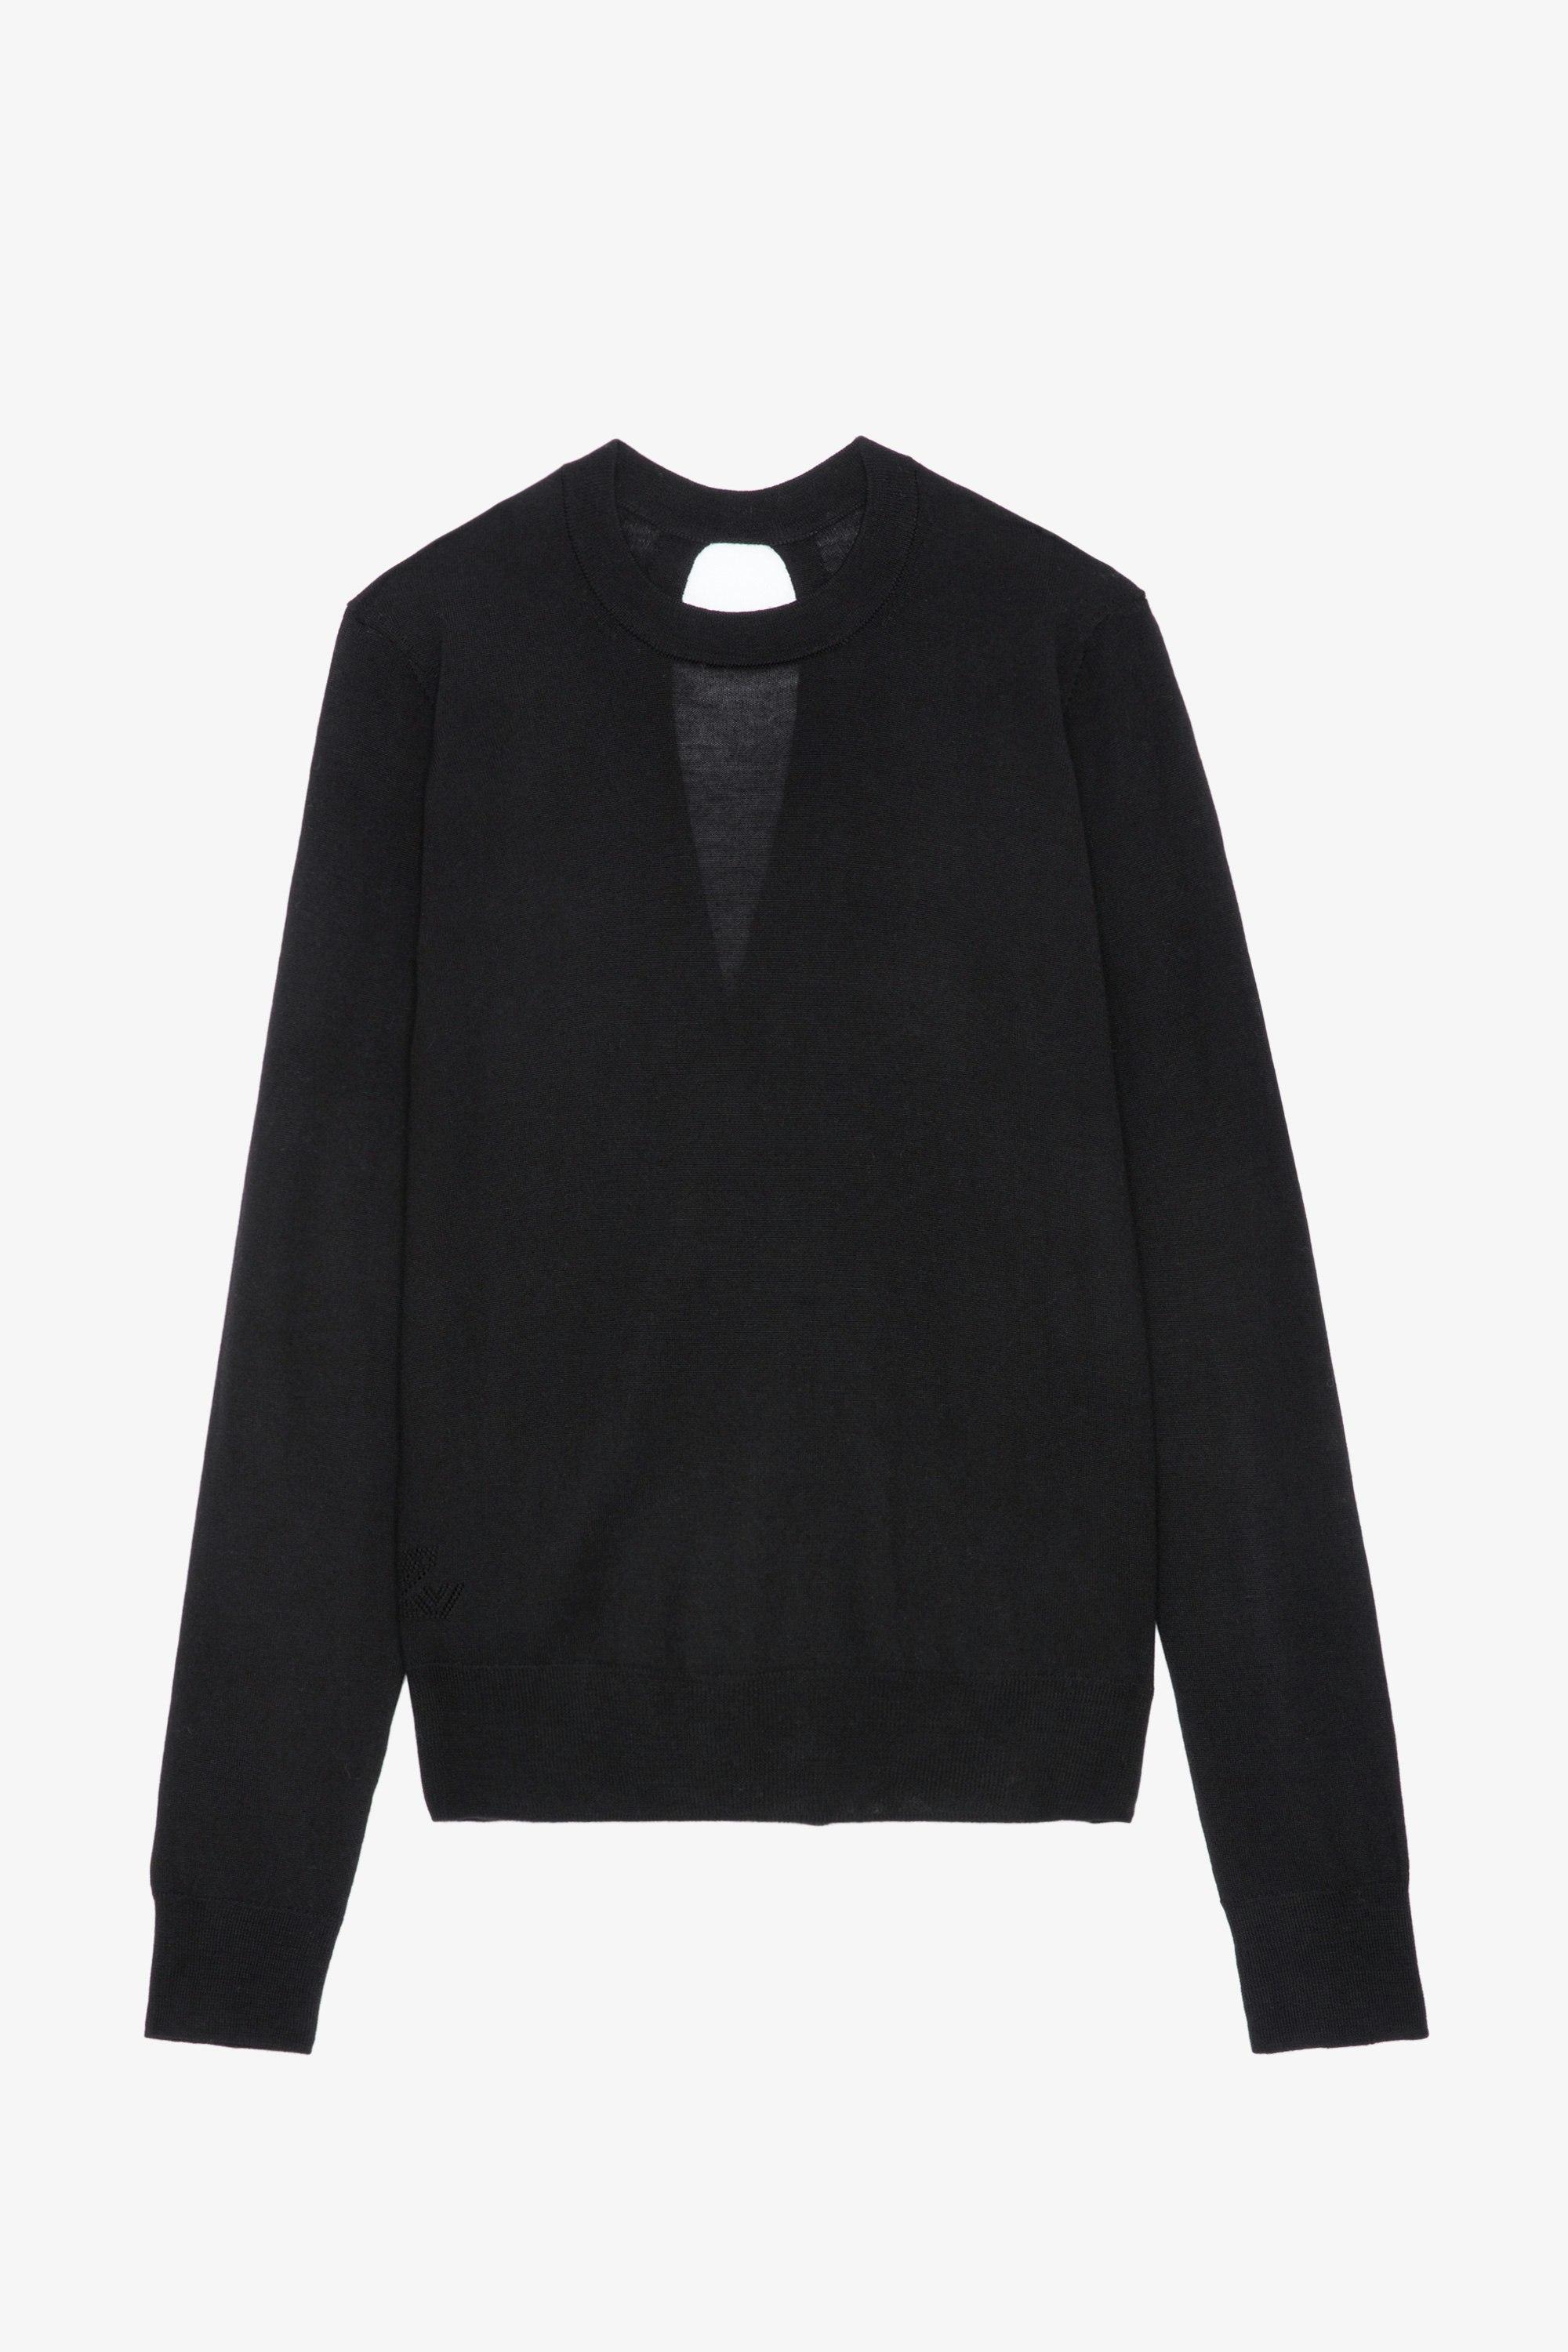 Emma Sweater - Black merino wool round-neck sweater with long sleeves and open crossover back.